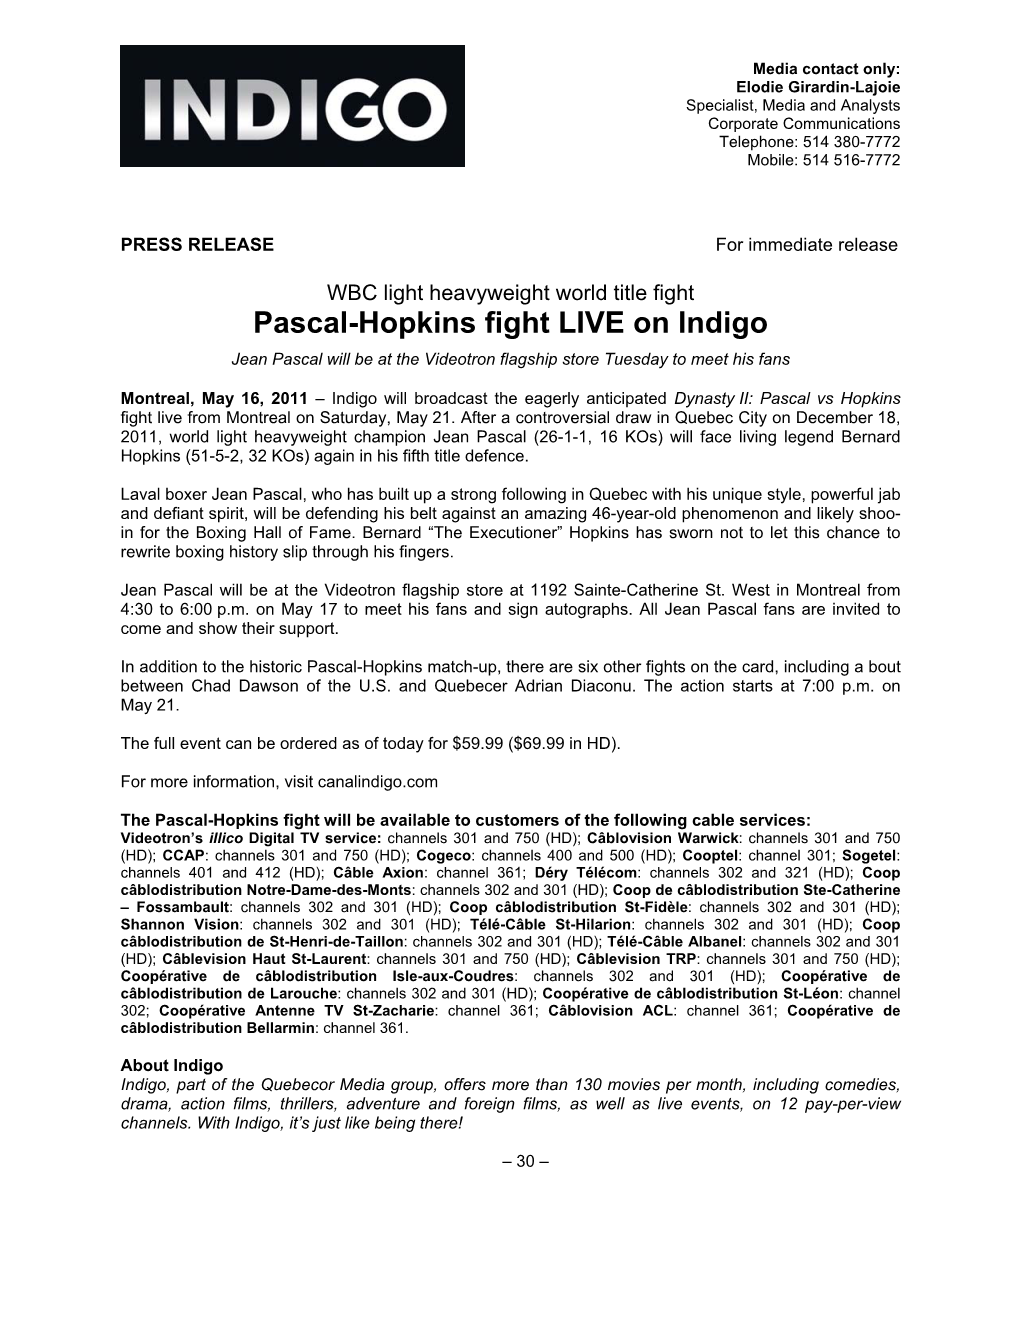 Pascal-Hopkins Fight LIVE on Indigo Jean Pascal Will Be at the Videotron Flagship Store Tuesday to Meet His Fans